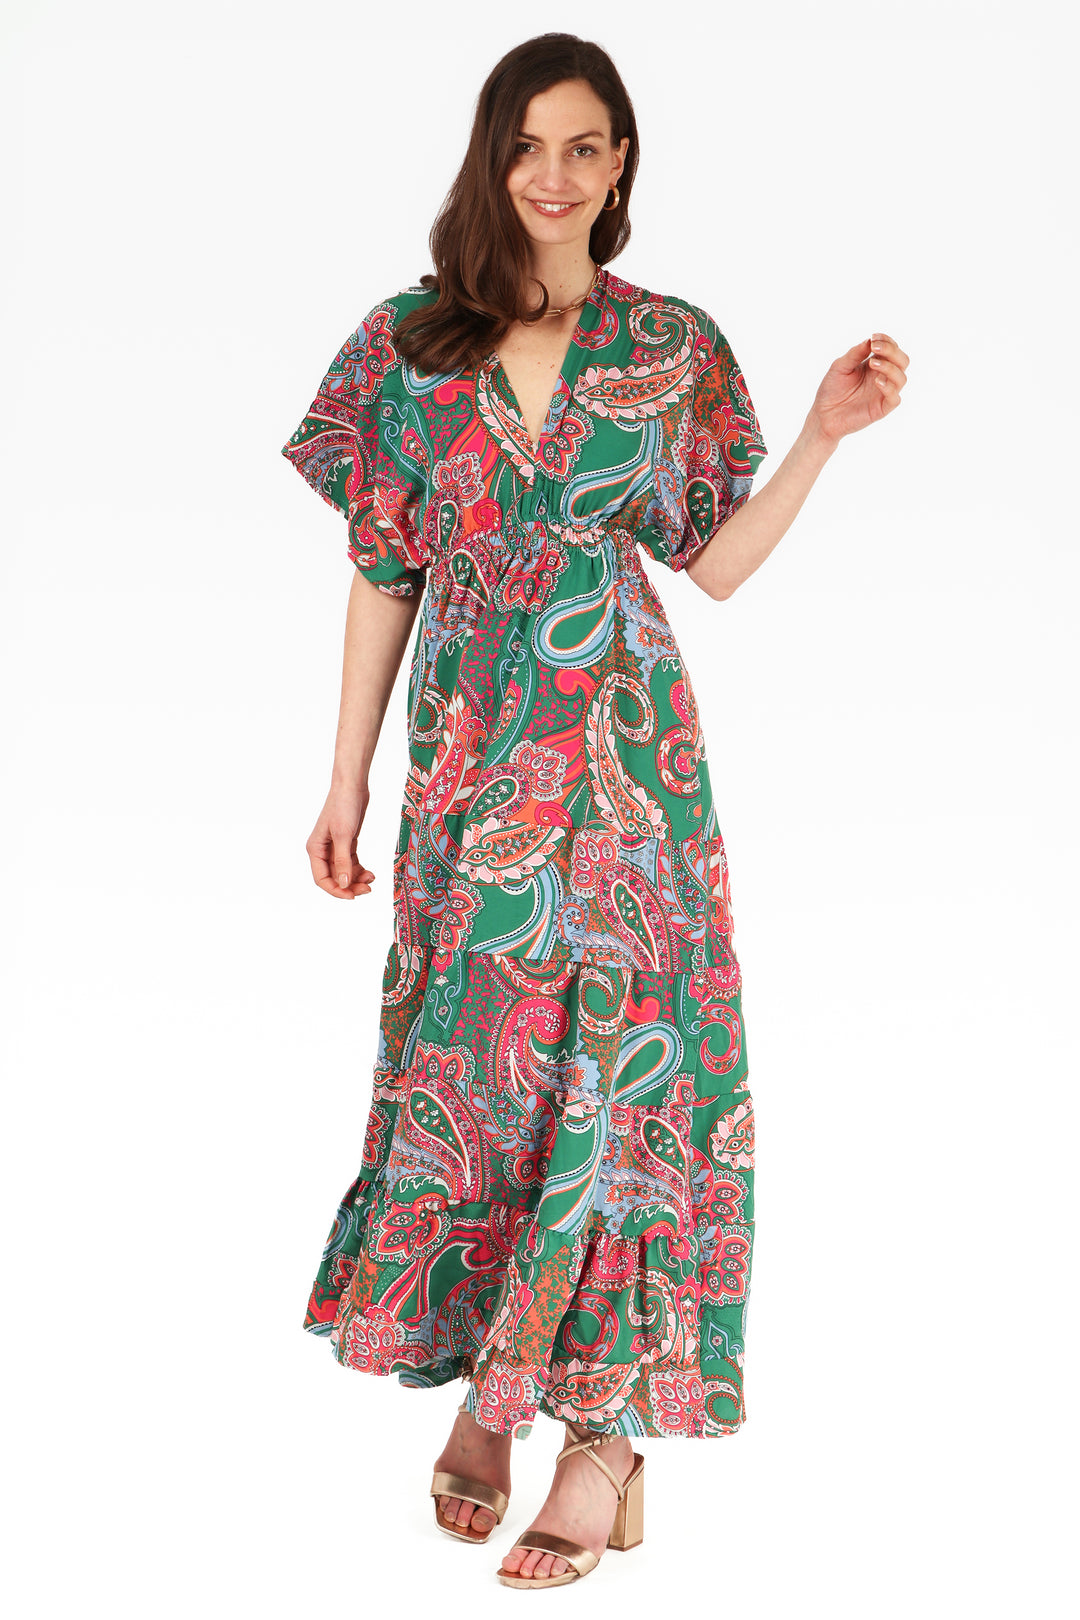 model wearing a maxi length green and pink paisley patterns kaftan dress with elbow lenght sleeves and a plunging v neck